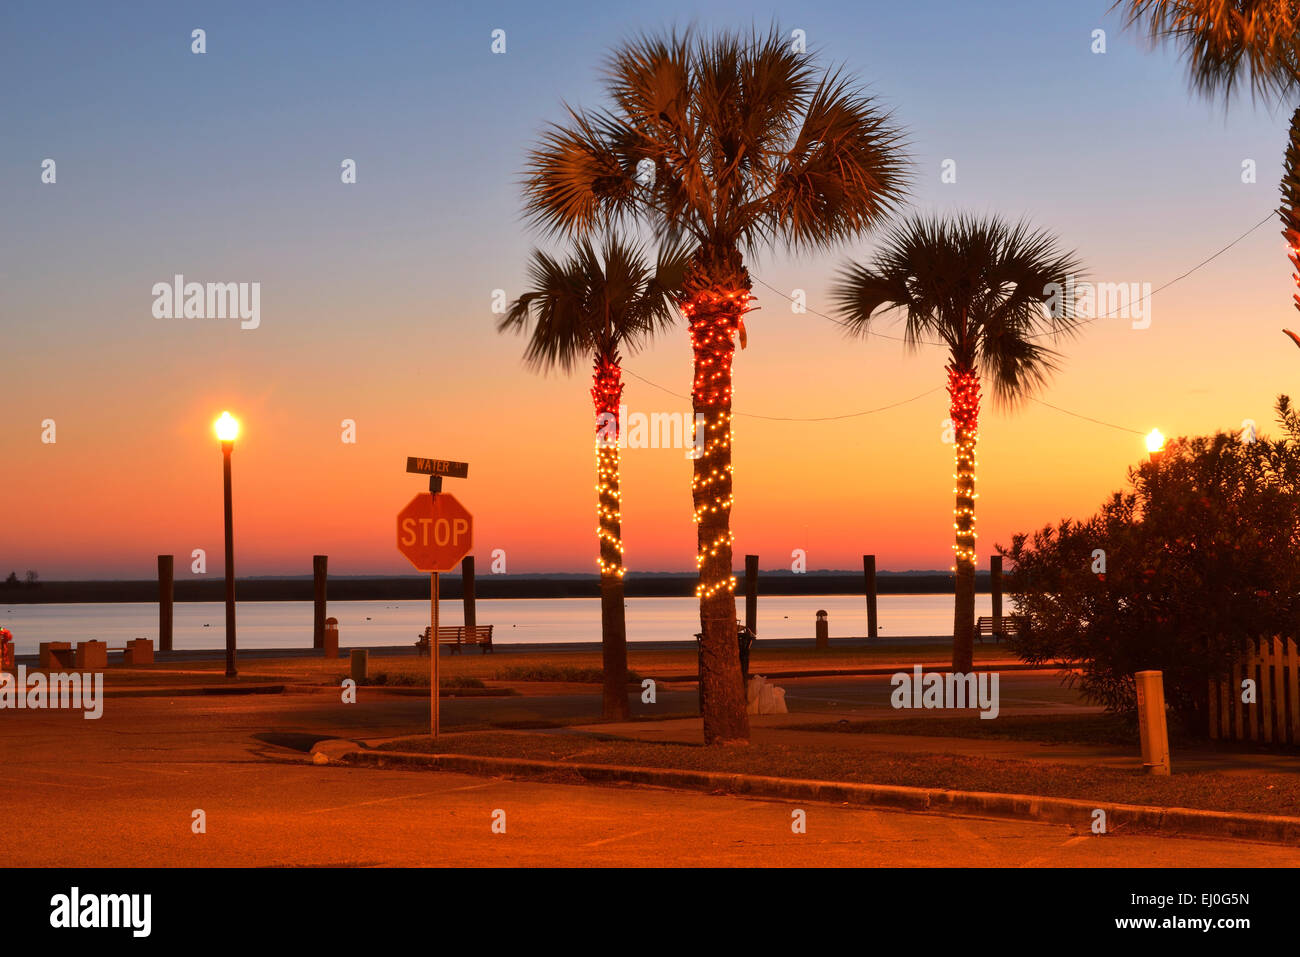 USA, Florida, Franklin County, Apalachicola, decorated palm trees at the river, Stock Photo